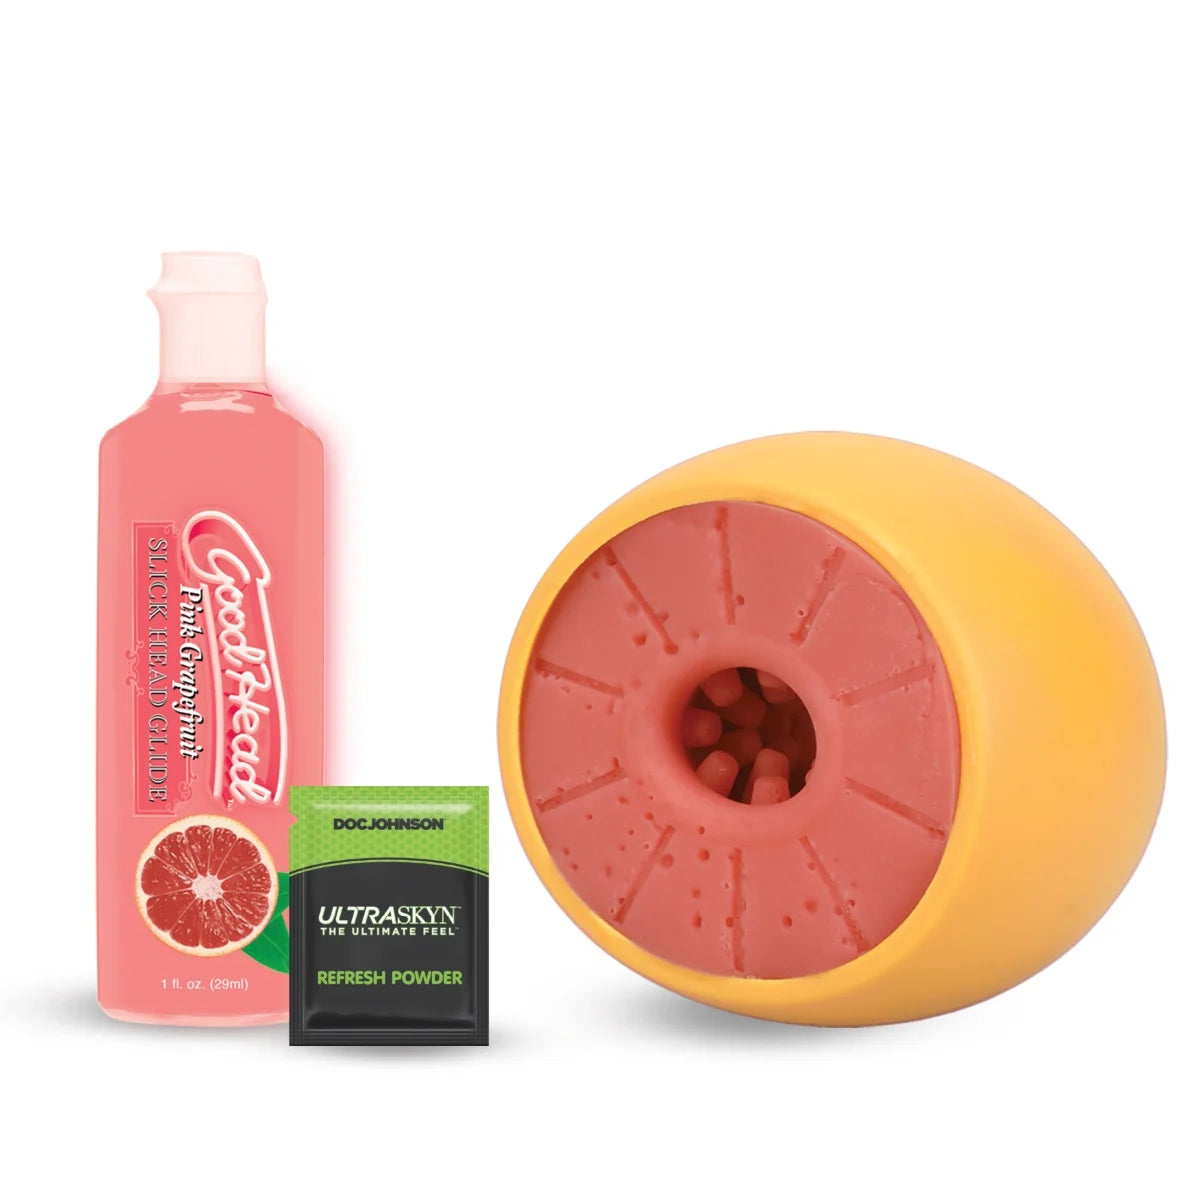 a grapefruit and a bottle of deodorant next to it